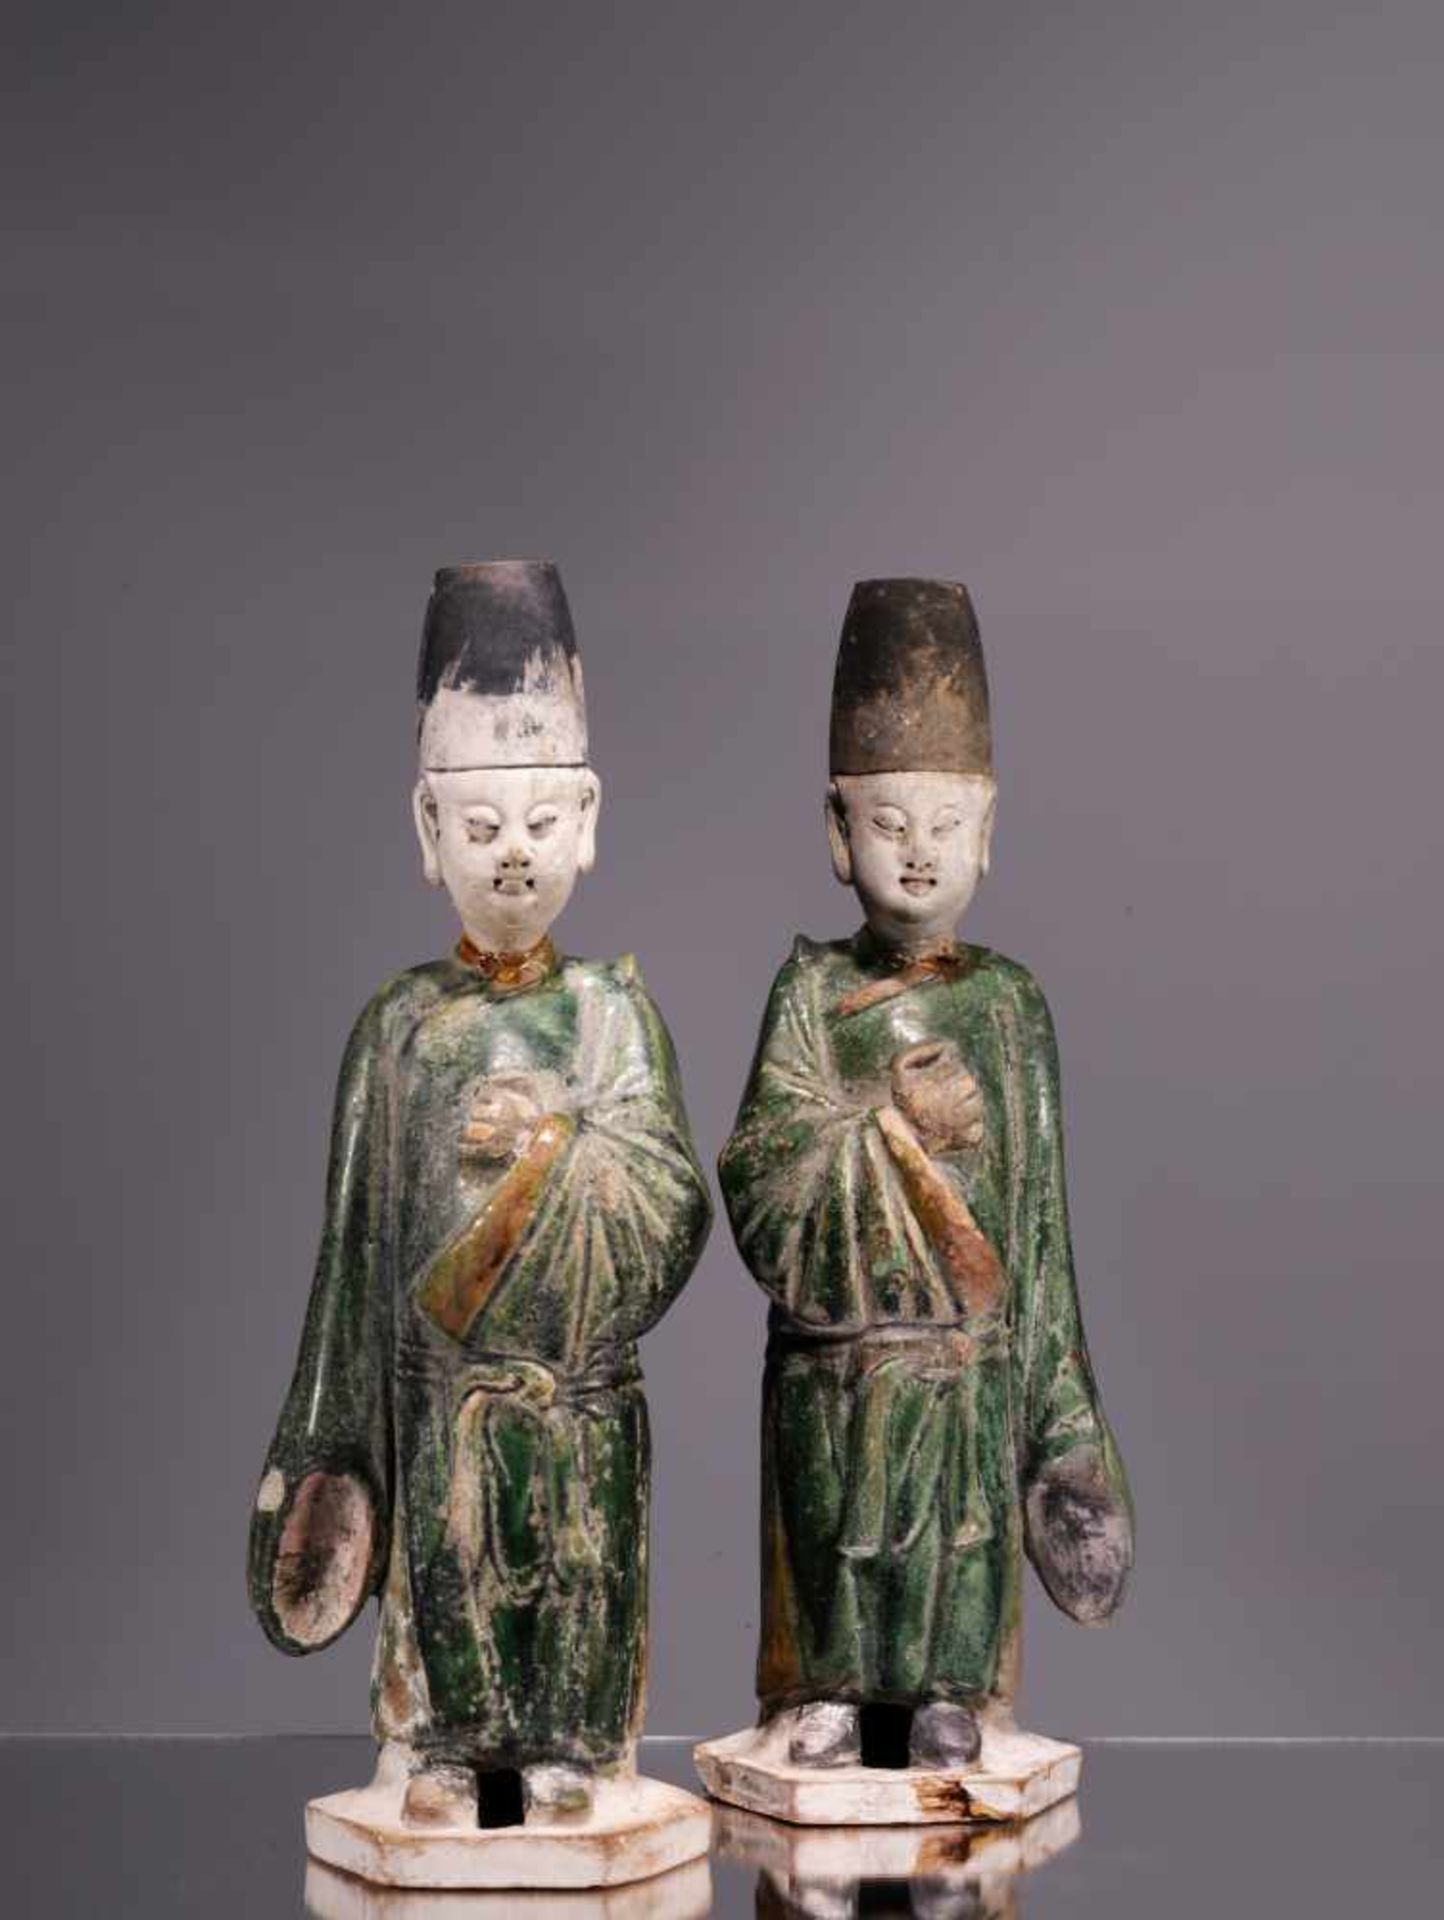 TWO CHINESE OFFICIALSPainted earthenwareChina , Ming Dynasty Dimensions: Height 33 cmWeight: Both